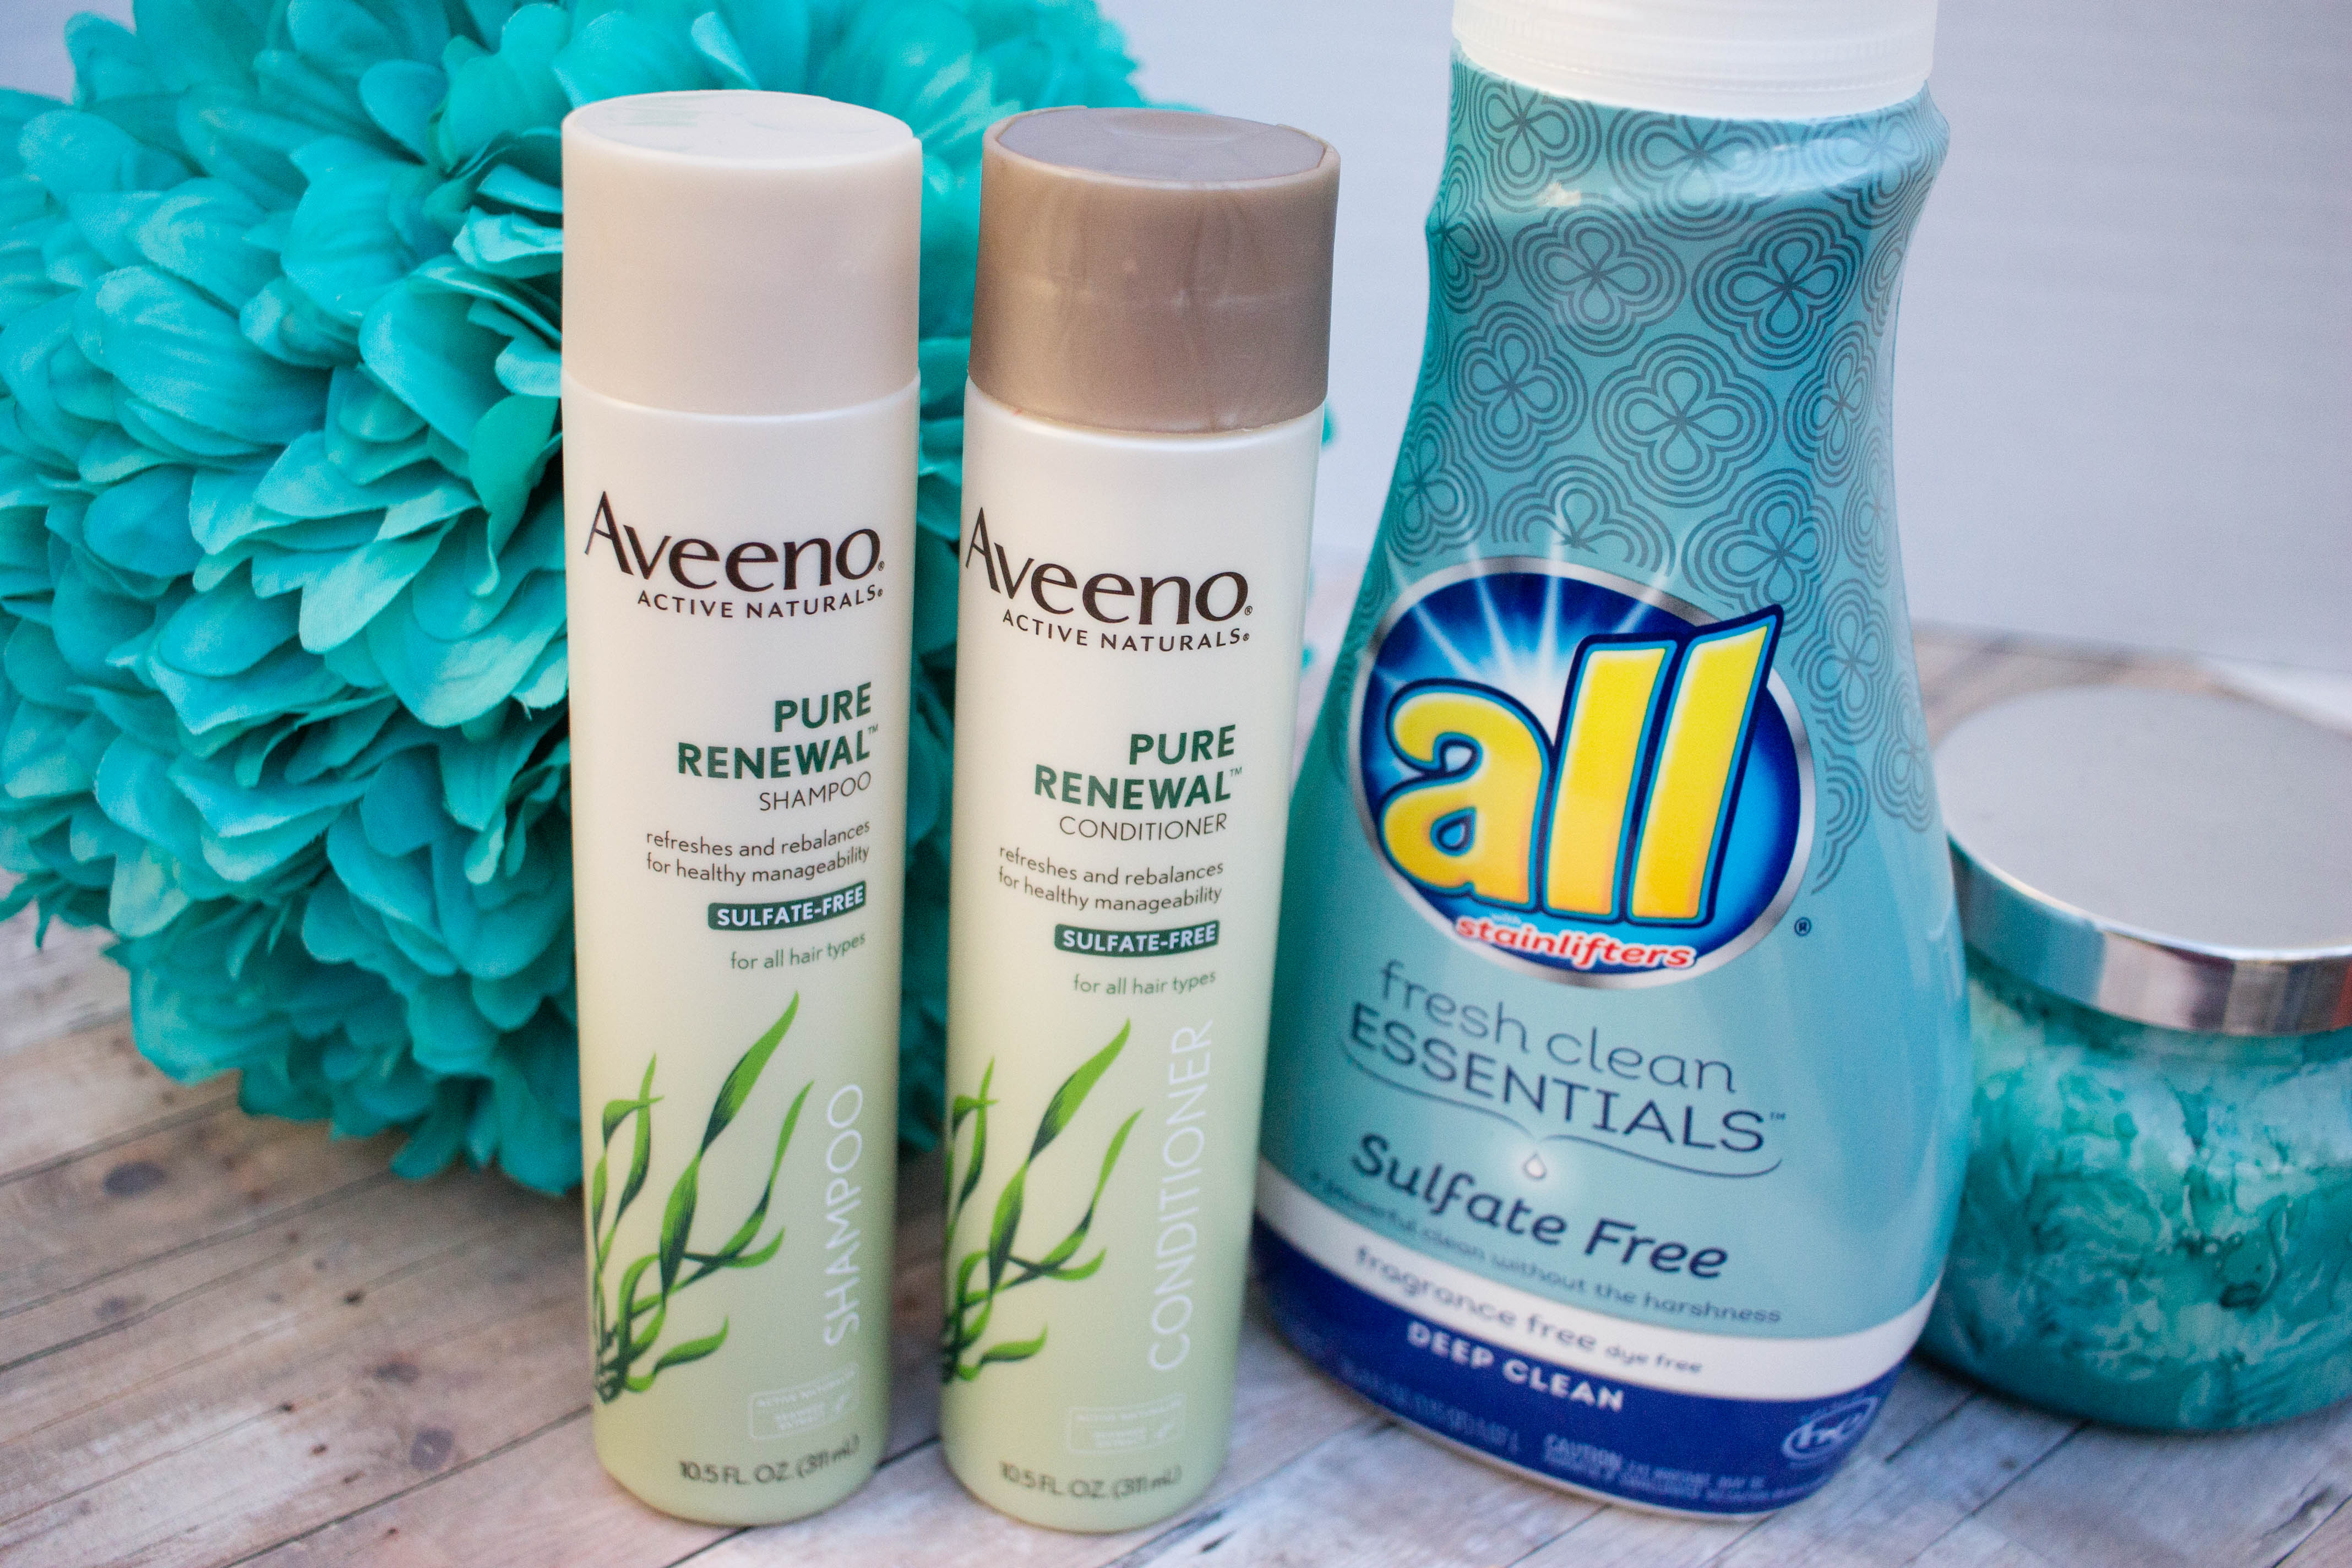 some of my favorite sulfate-free products: All Fresh Clean Essentials and Aveeno Pure Renewal!